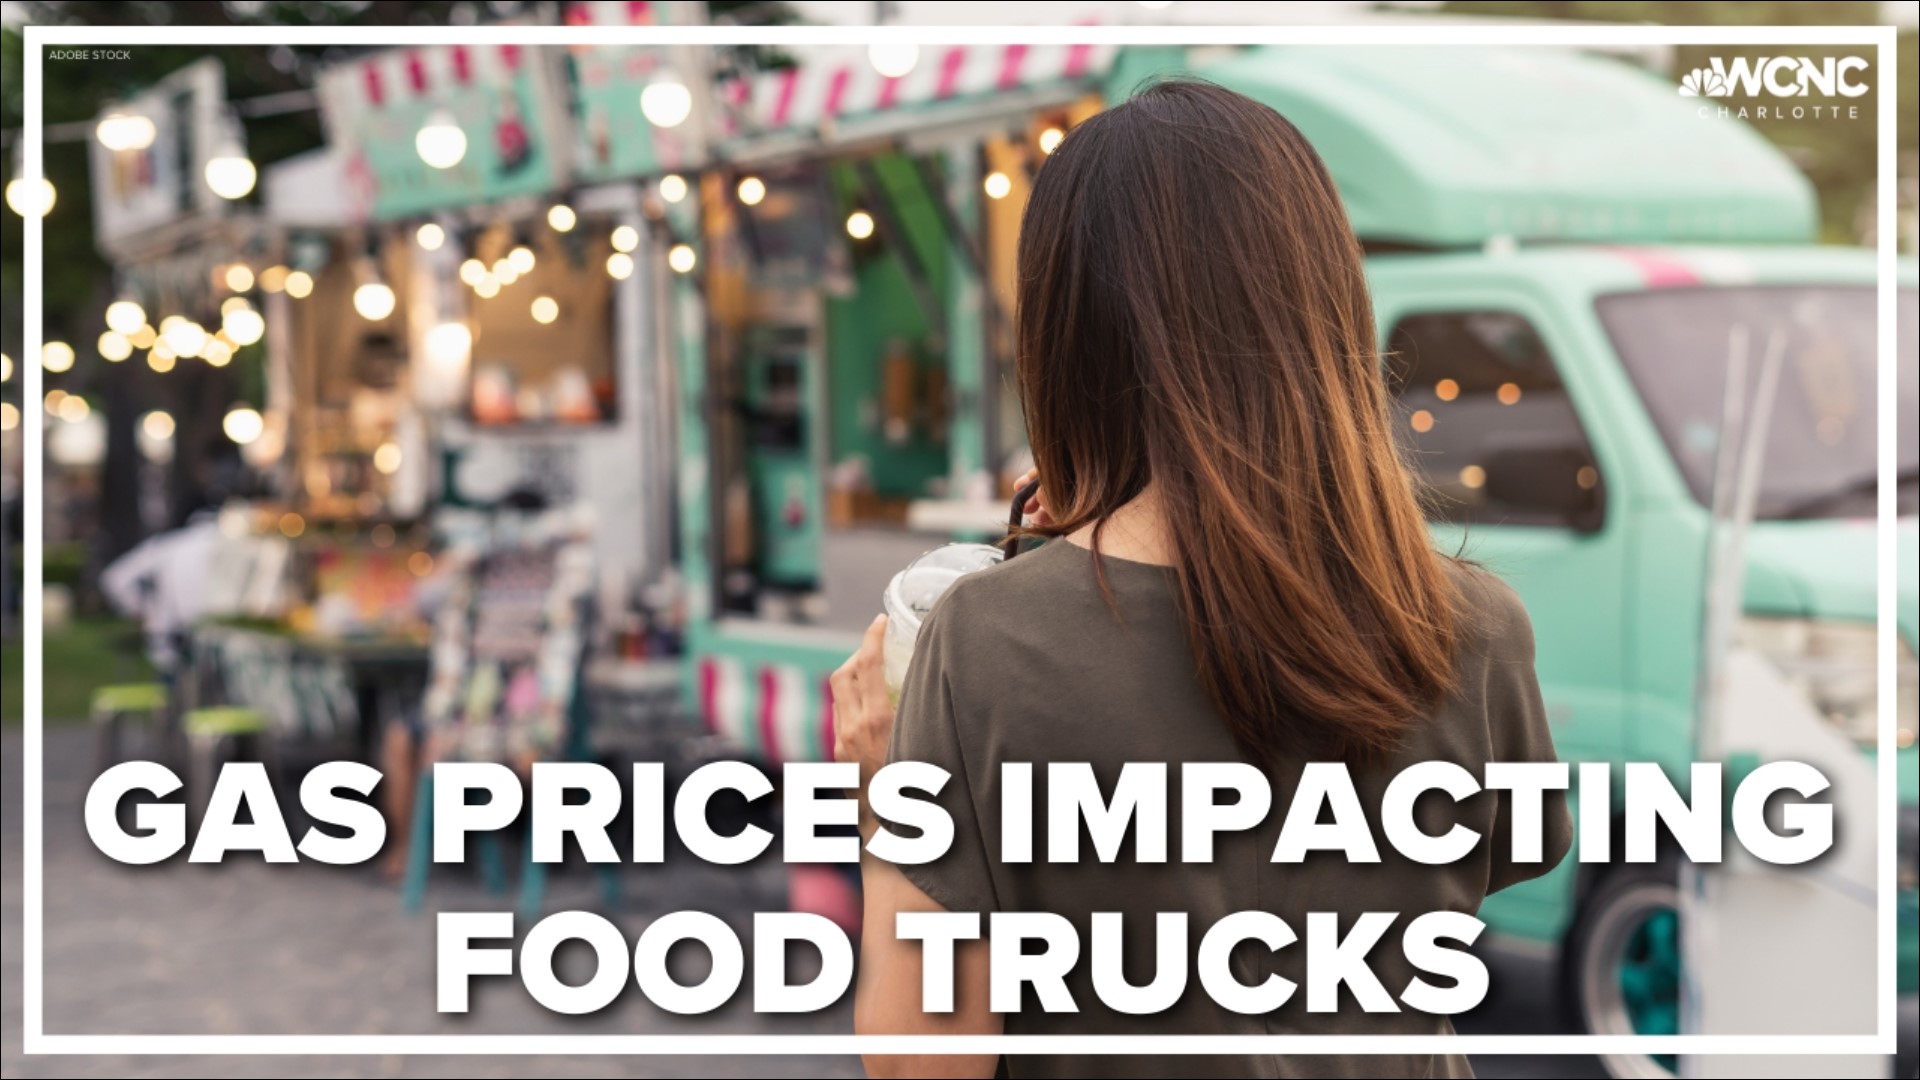 Gas prices are on the decline, but the price of fuel is still having an impact on food trucks.